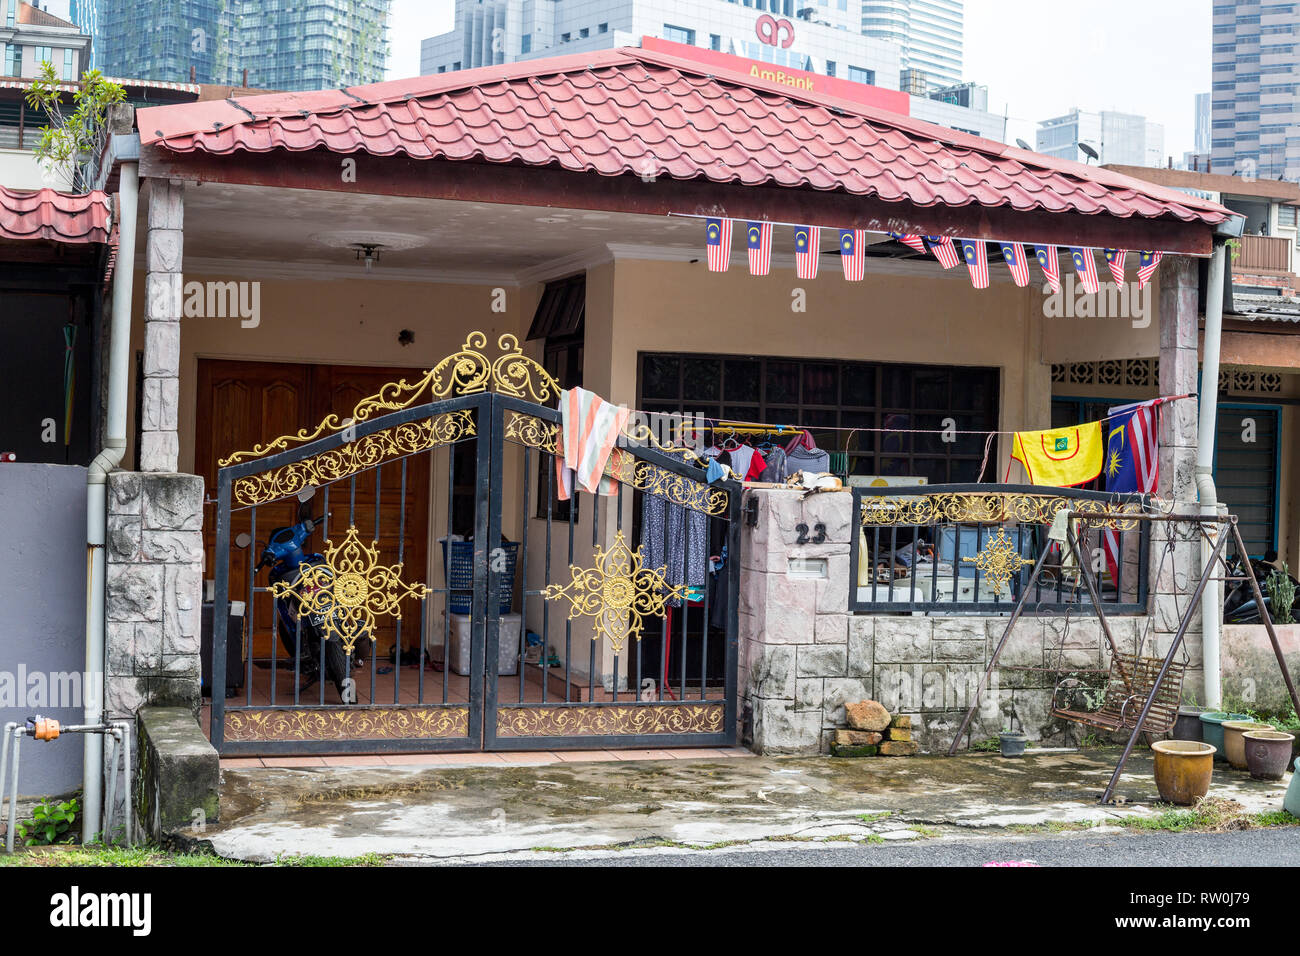 Kampung Baru, Typical Private Family House in Traditional Malay Enclave, Kuala Lumpur, Malaysia. Stock Photo